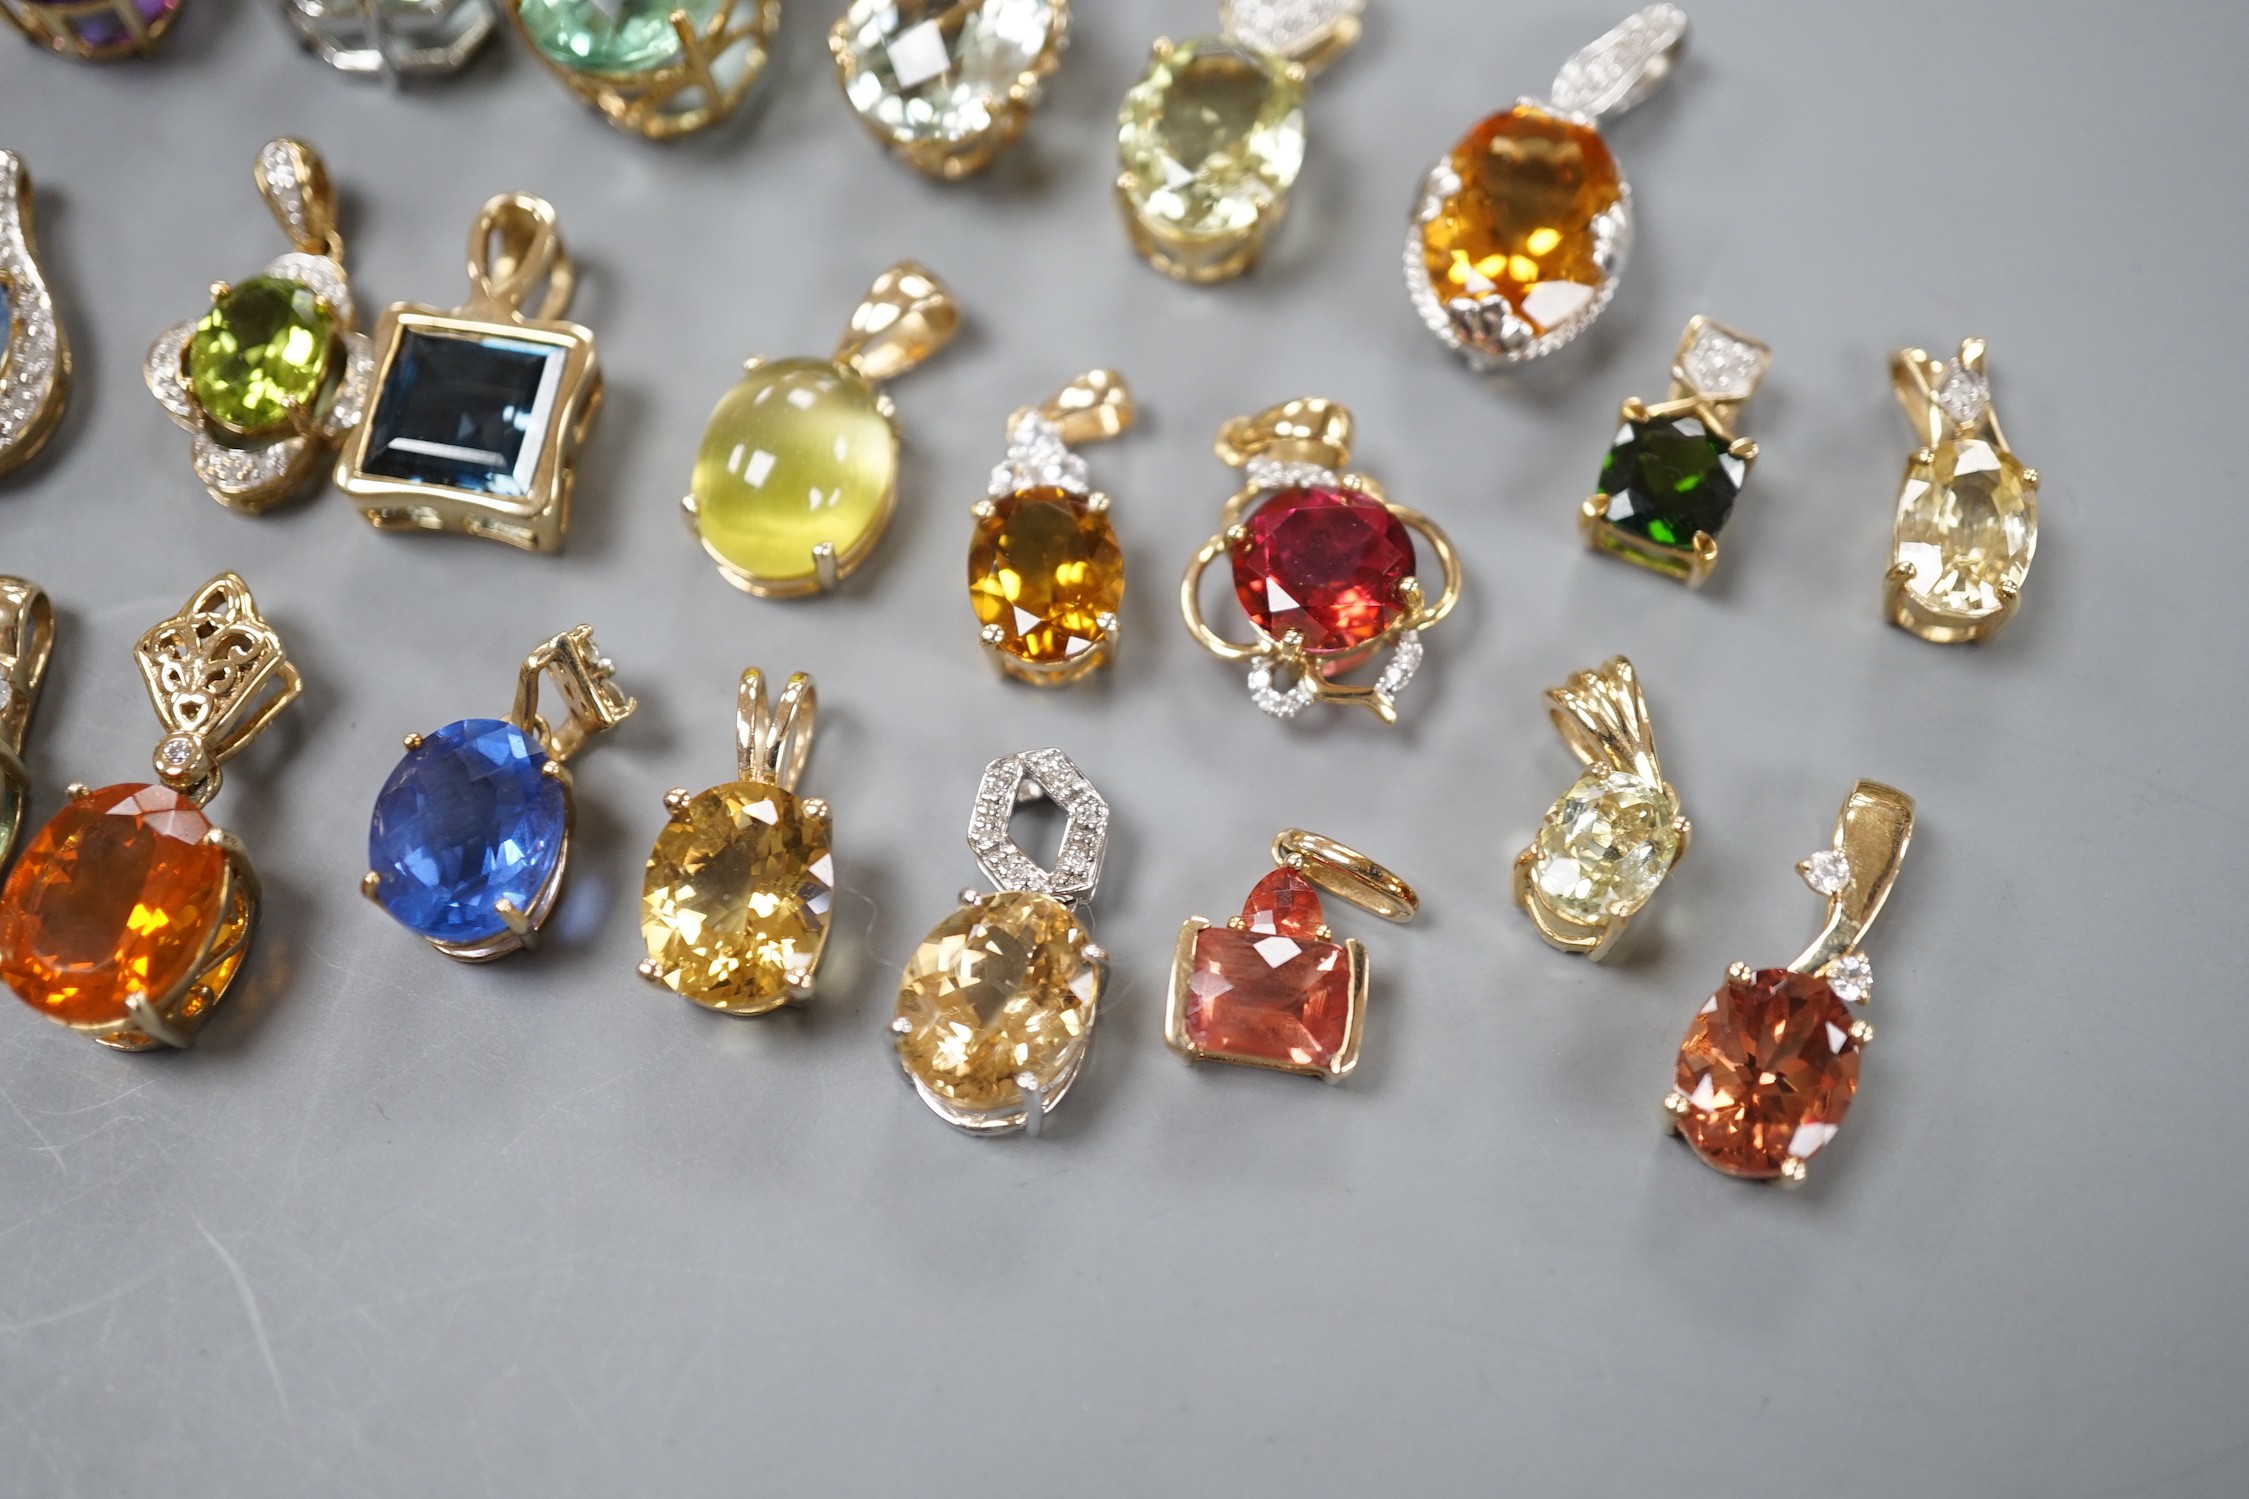 Twenty five assorted modern 9ct gold or 9k and gem set pendants, including amethyst and citrine, gross weight 54.7 grams.